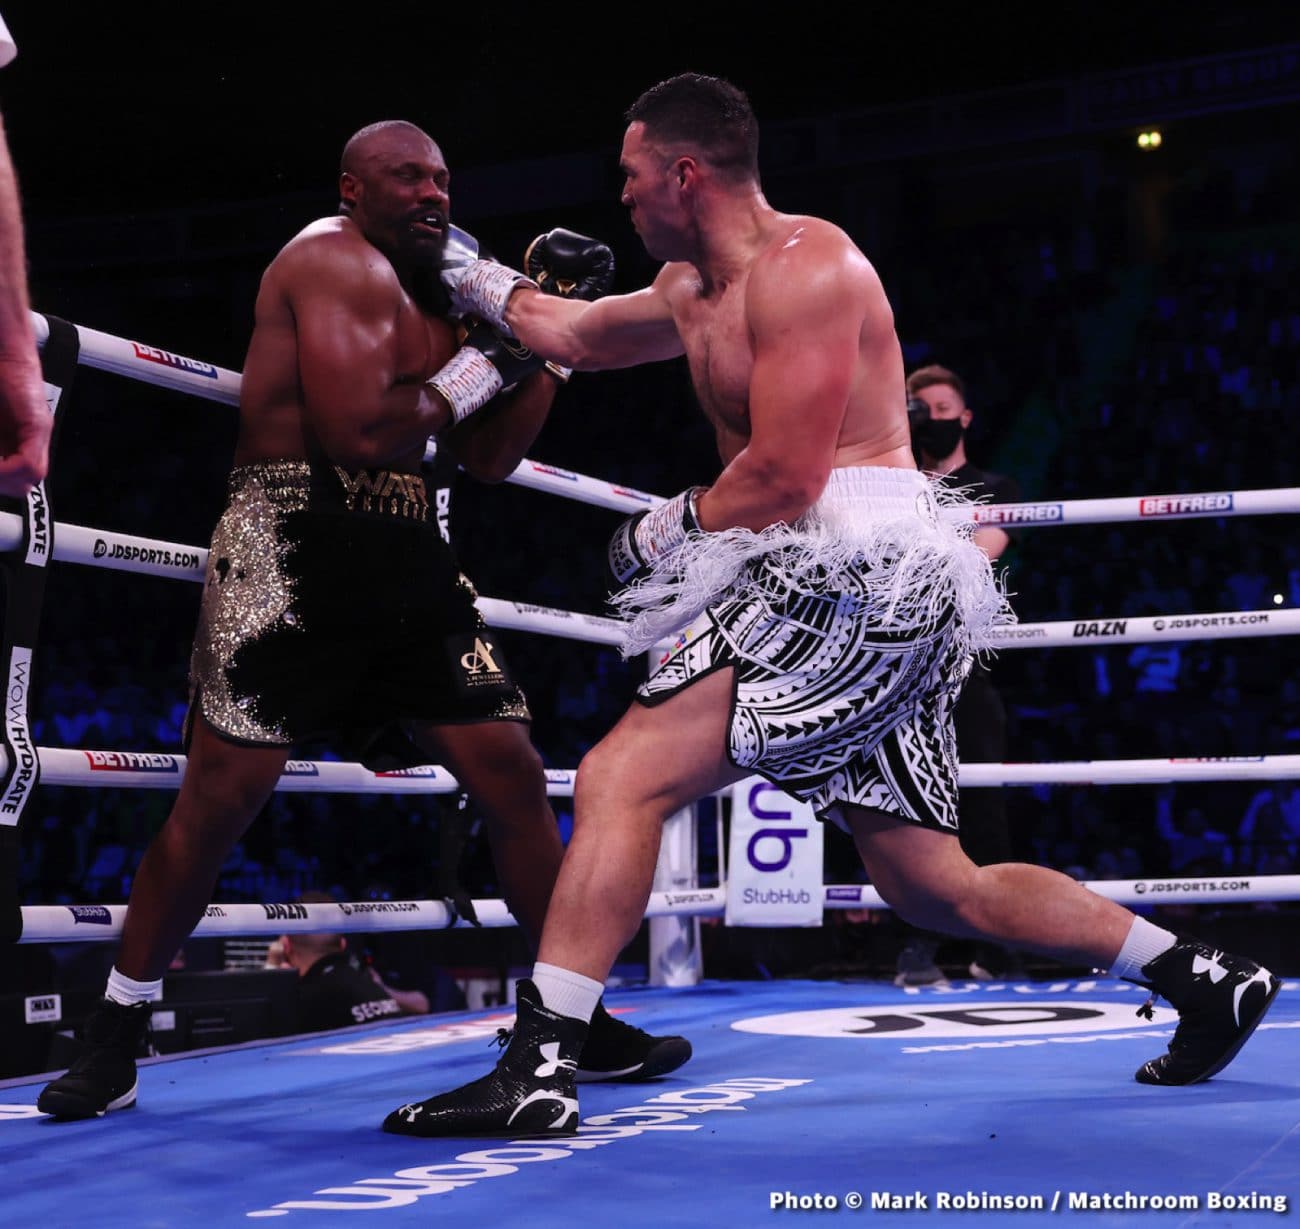 Image: Is Chisora the absolute worst opponent for Fury to fight?